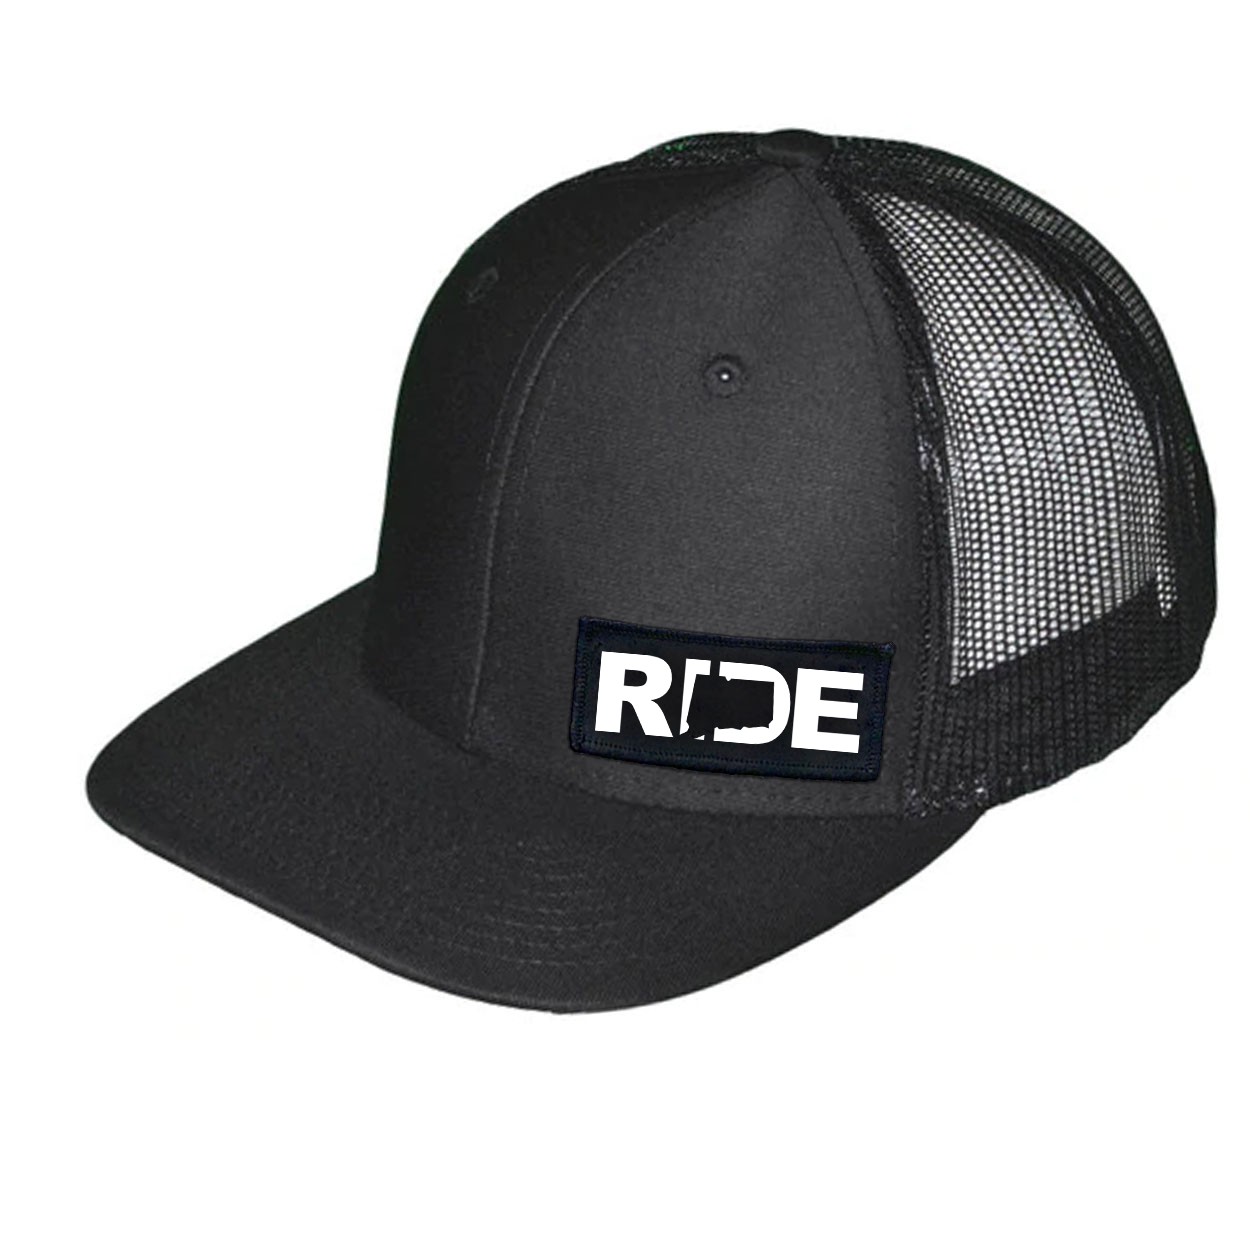 Ride Connecticut Night Out Woven Patch Snapback Trucker Hat Black (White Logo)